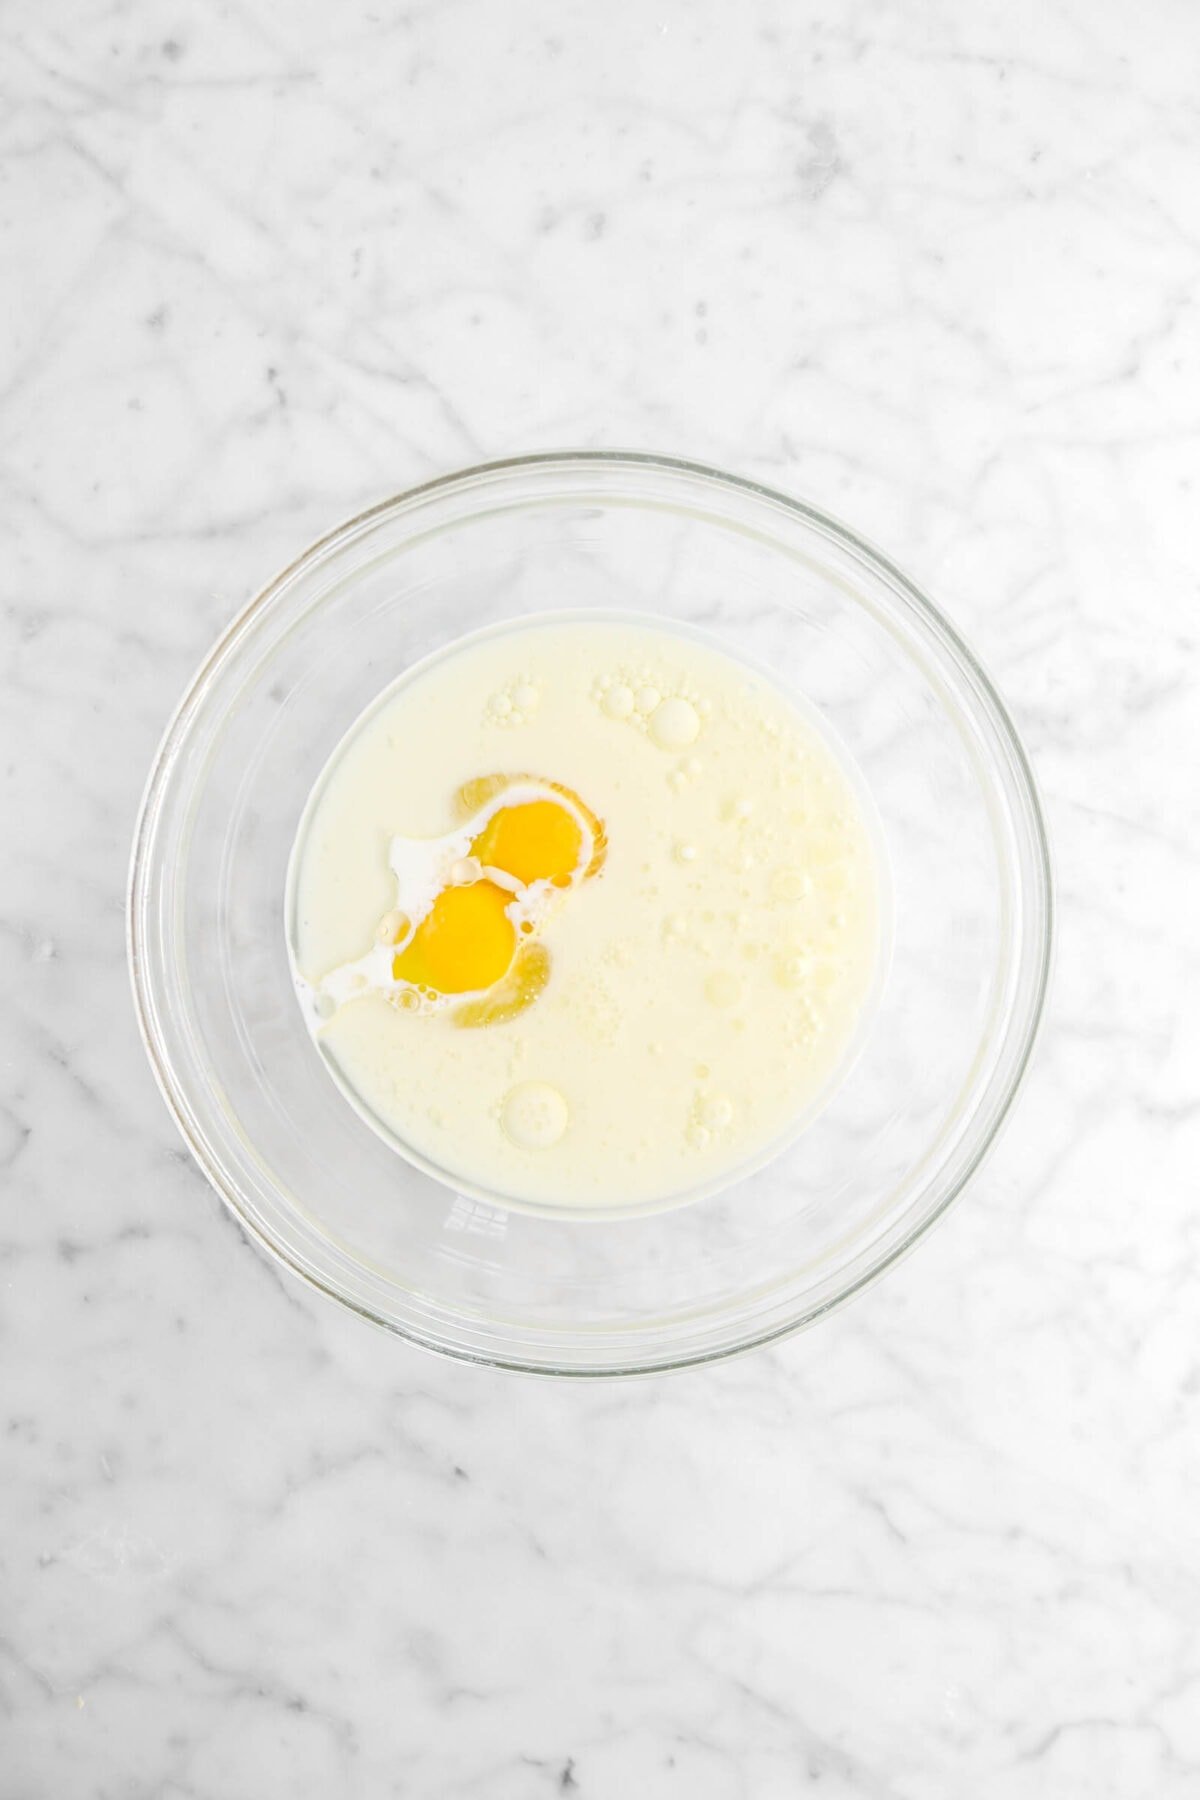 milk, eggs, and oil in glass bowl